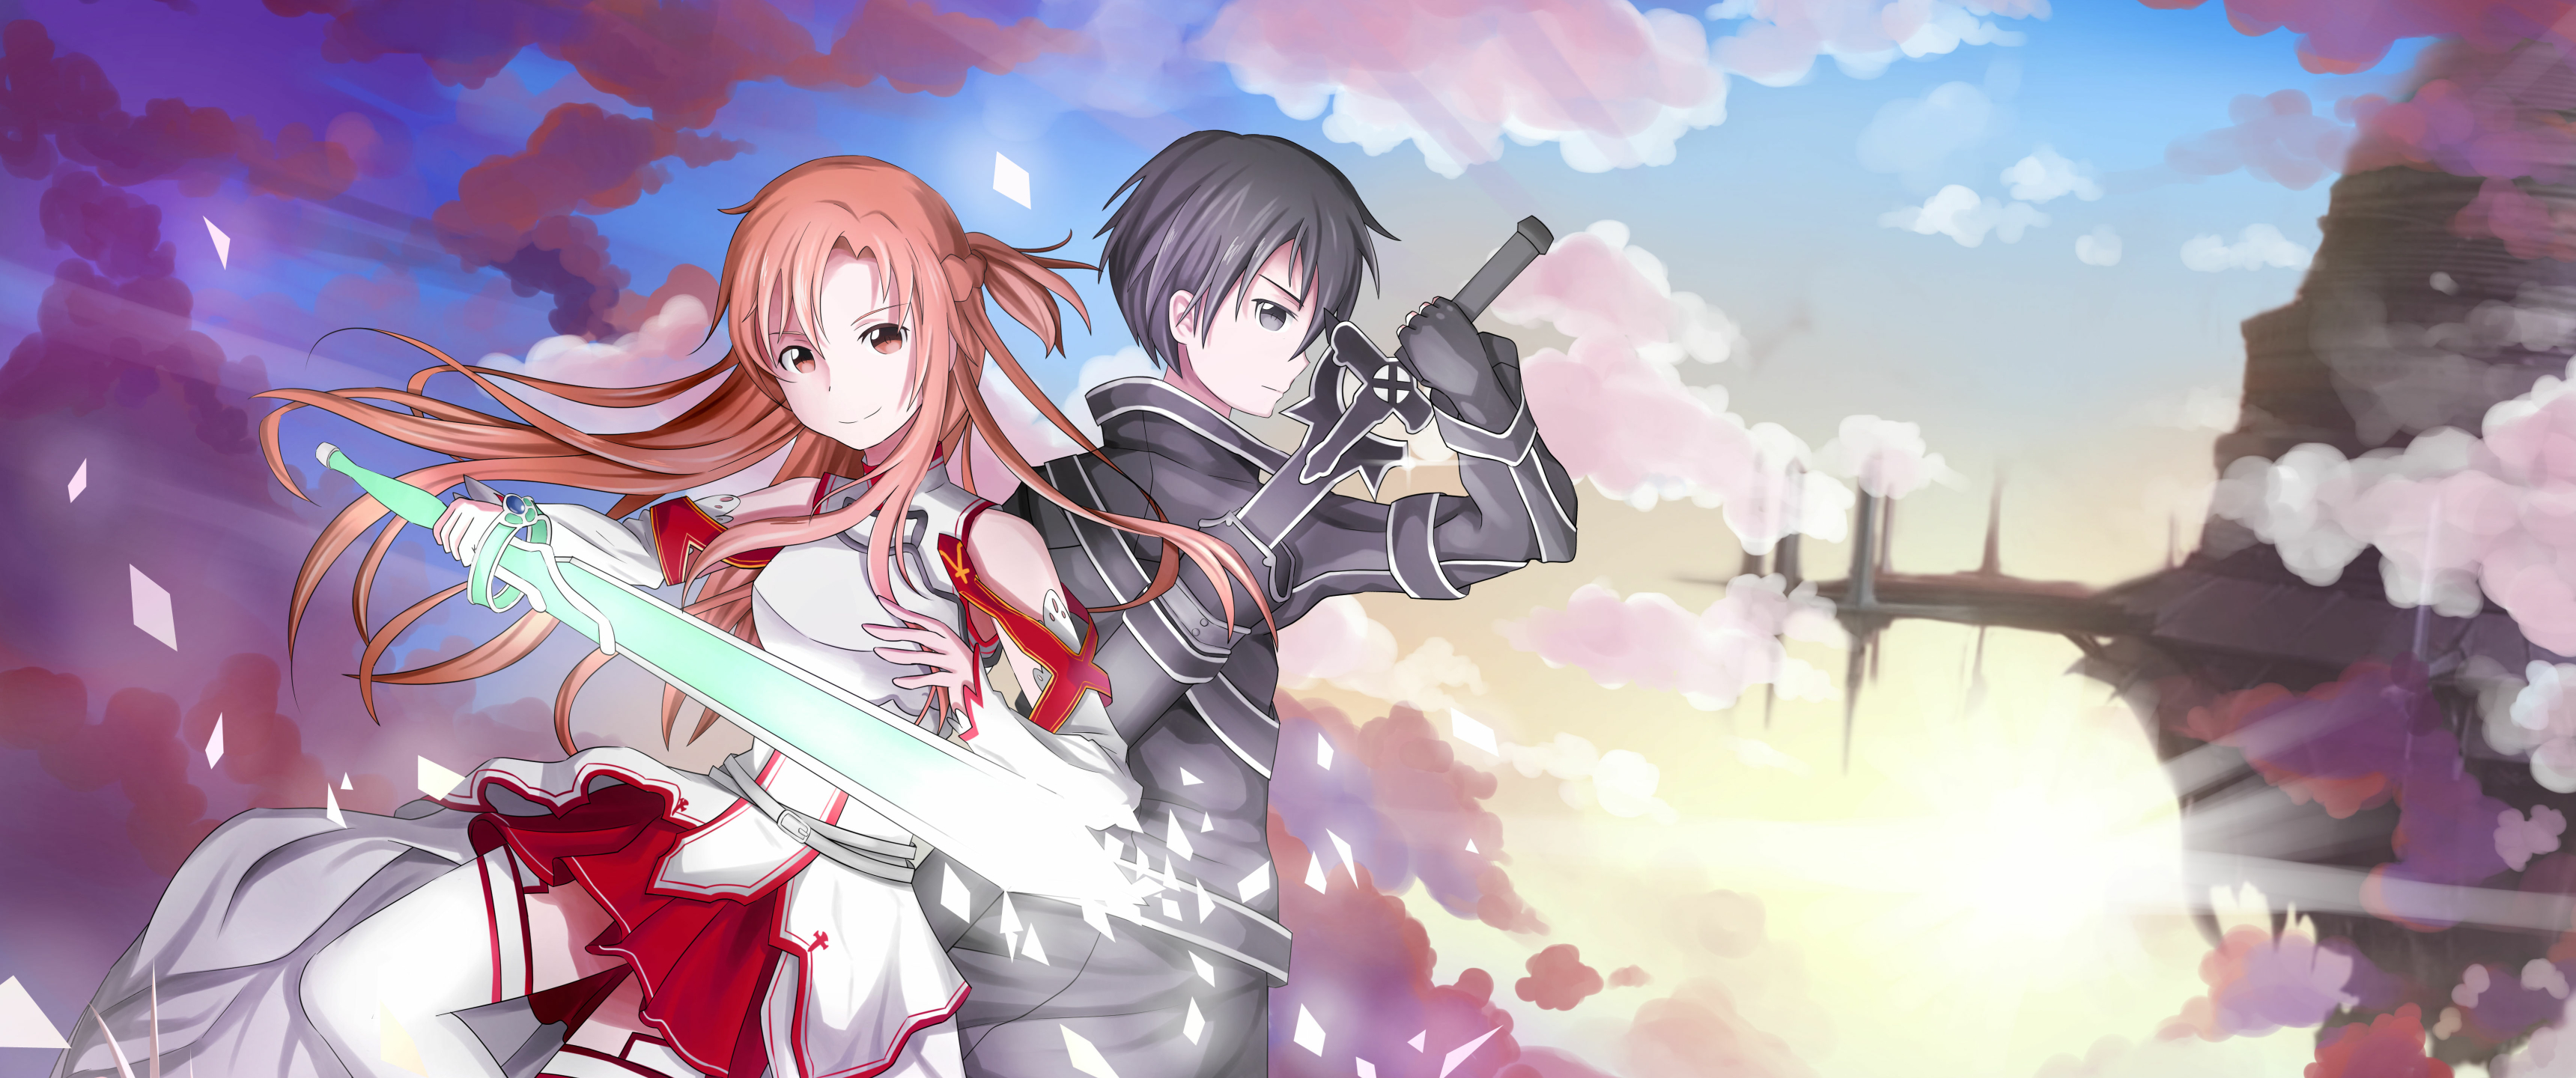 62 Kirito Wallpapers for iPhone and Android by Andrea Garcia